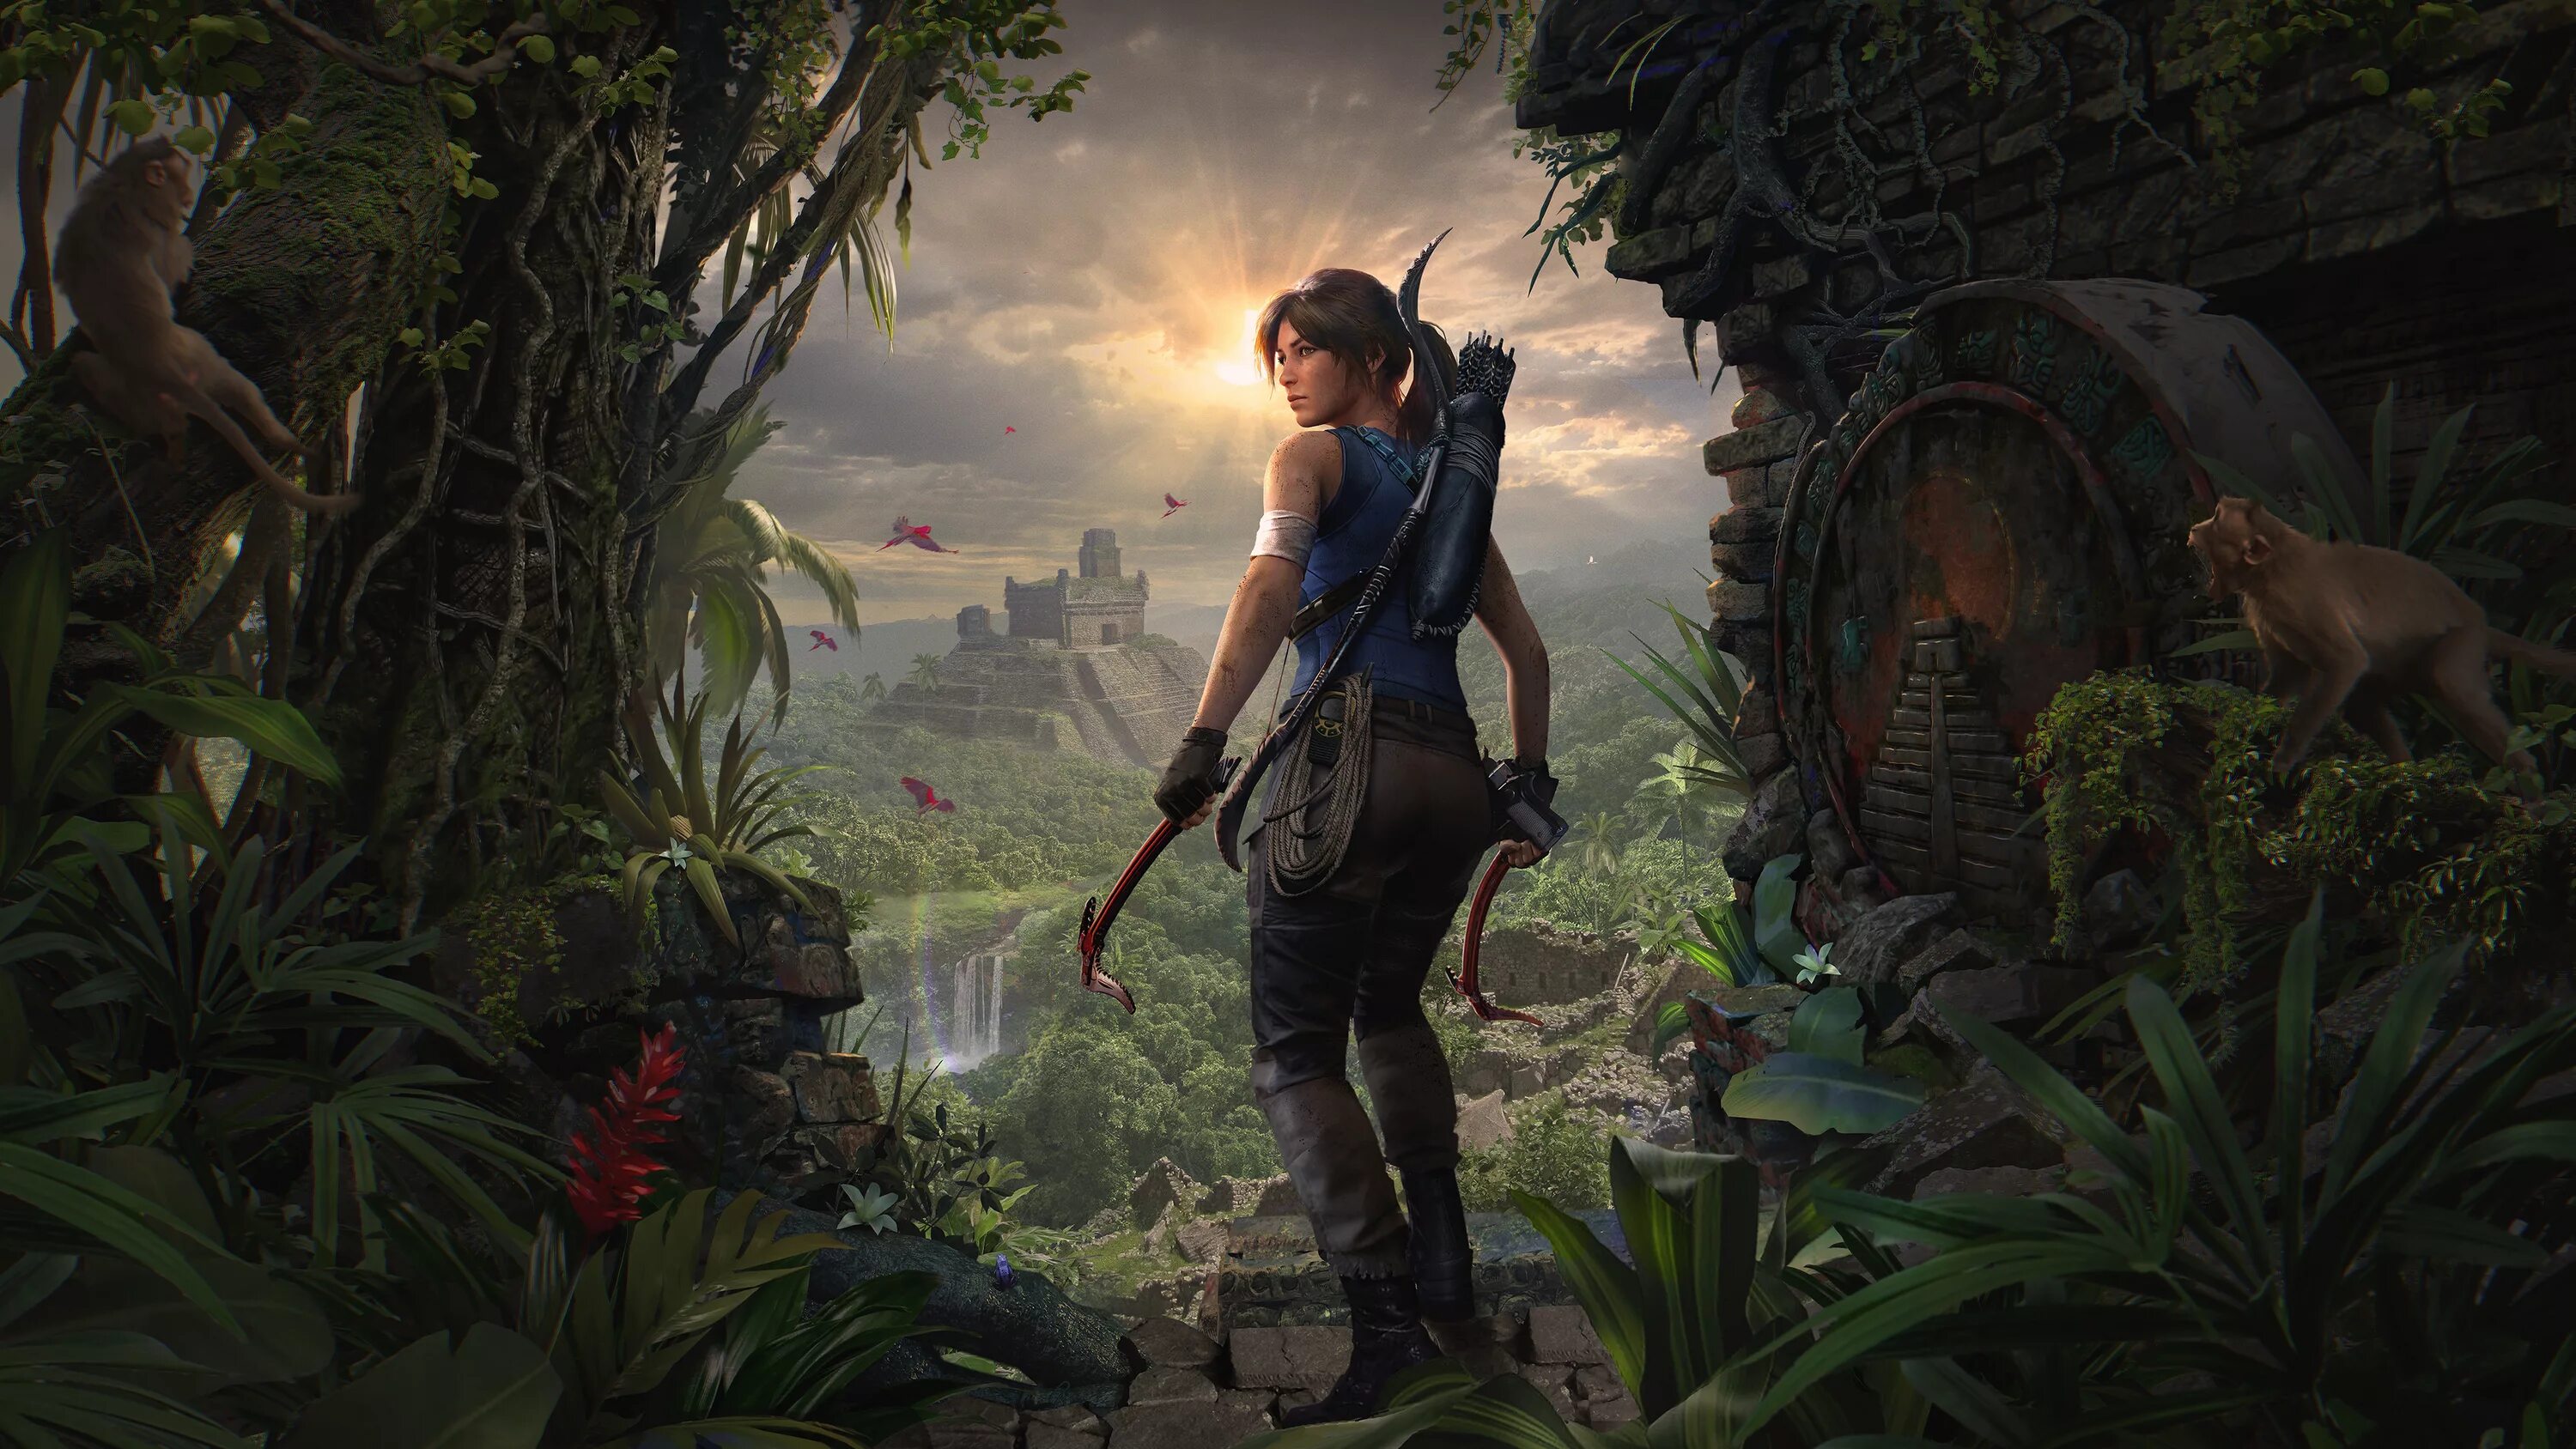 Tom shadow. Игра Shadow of the Tomb Raider 2018. Shadow of the Tomb Raider 4к.